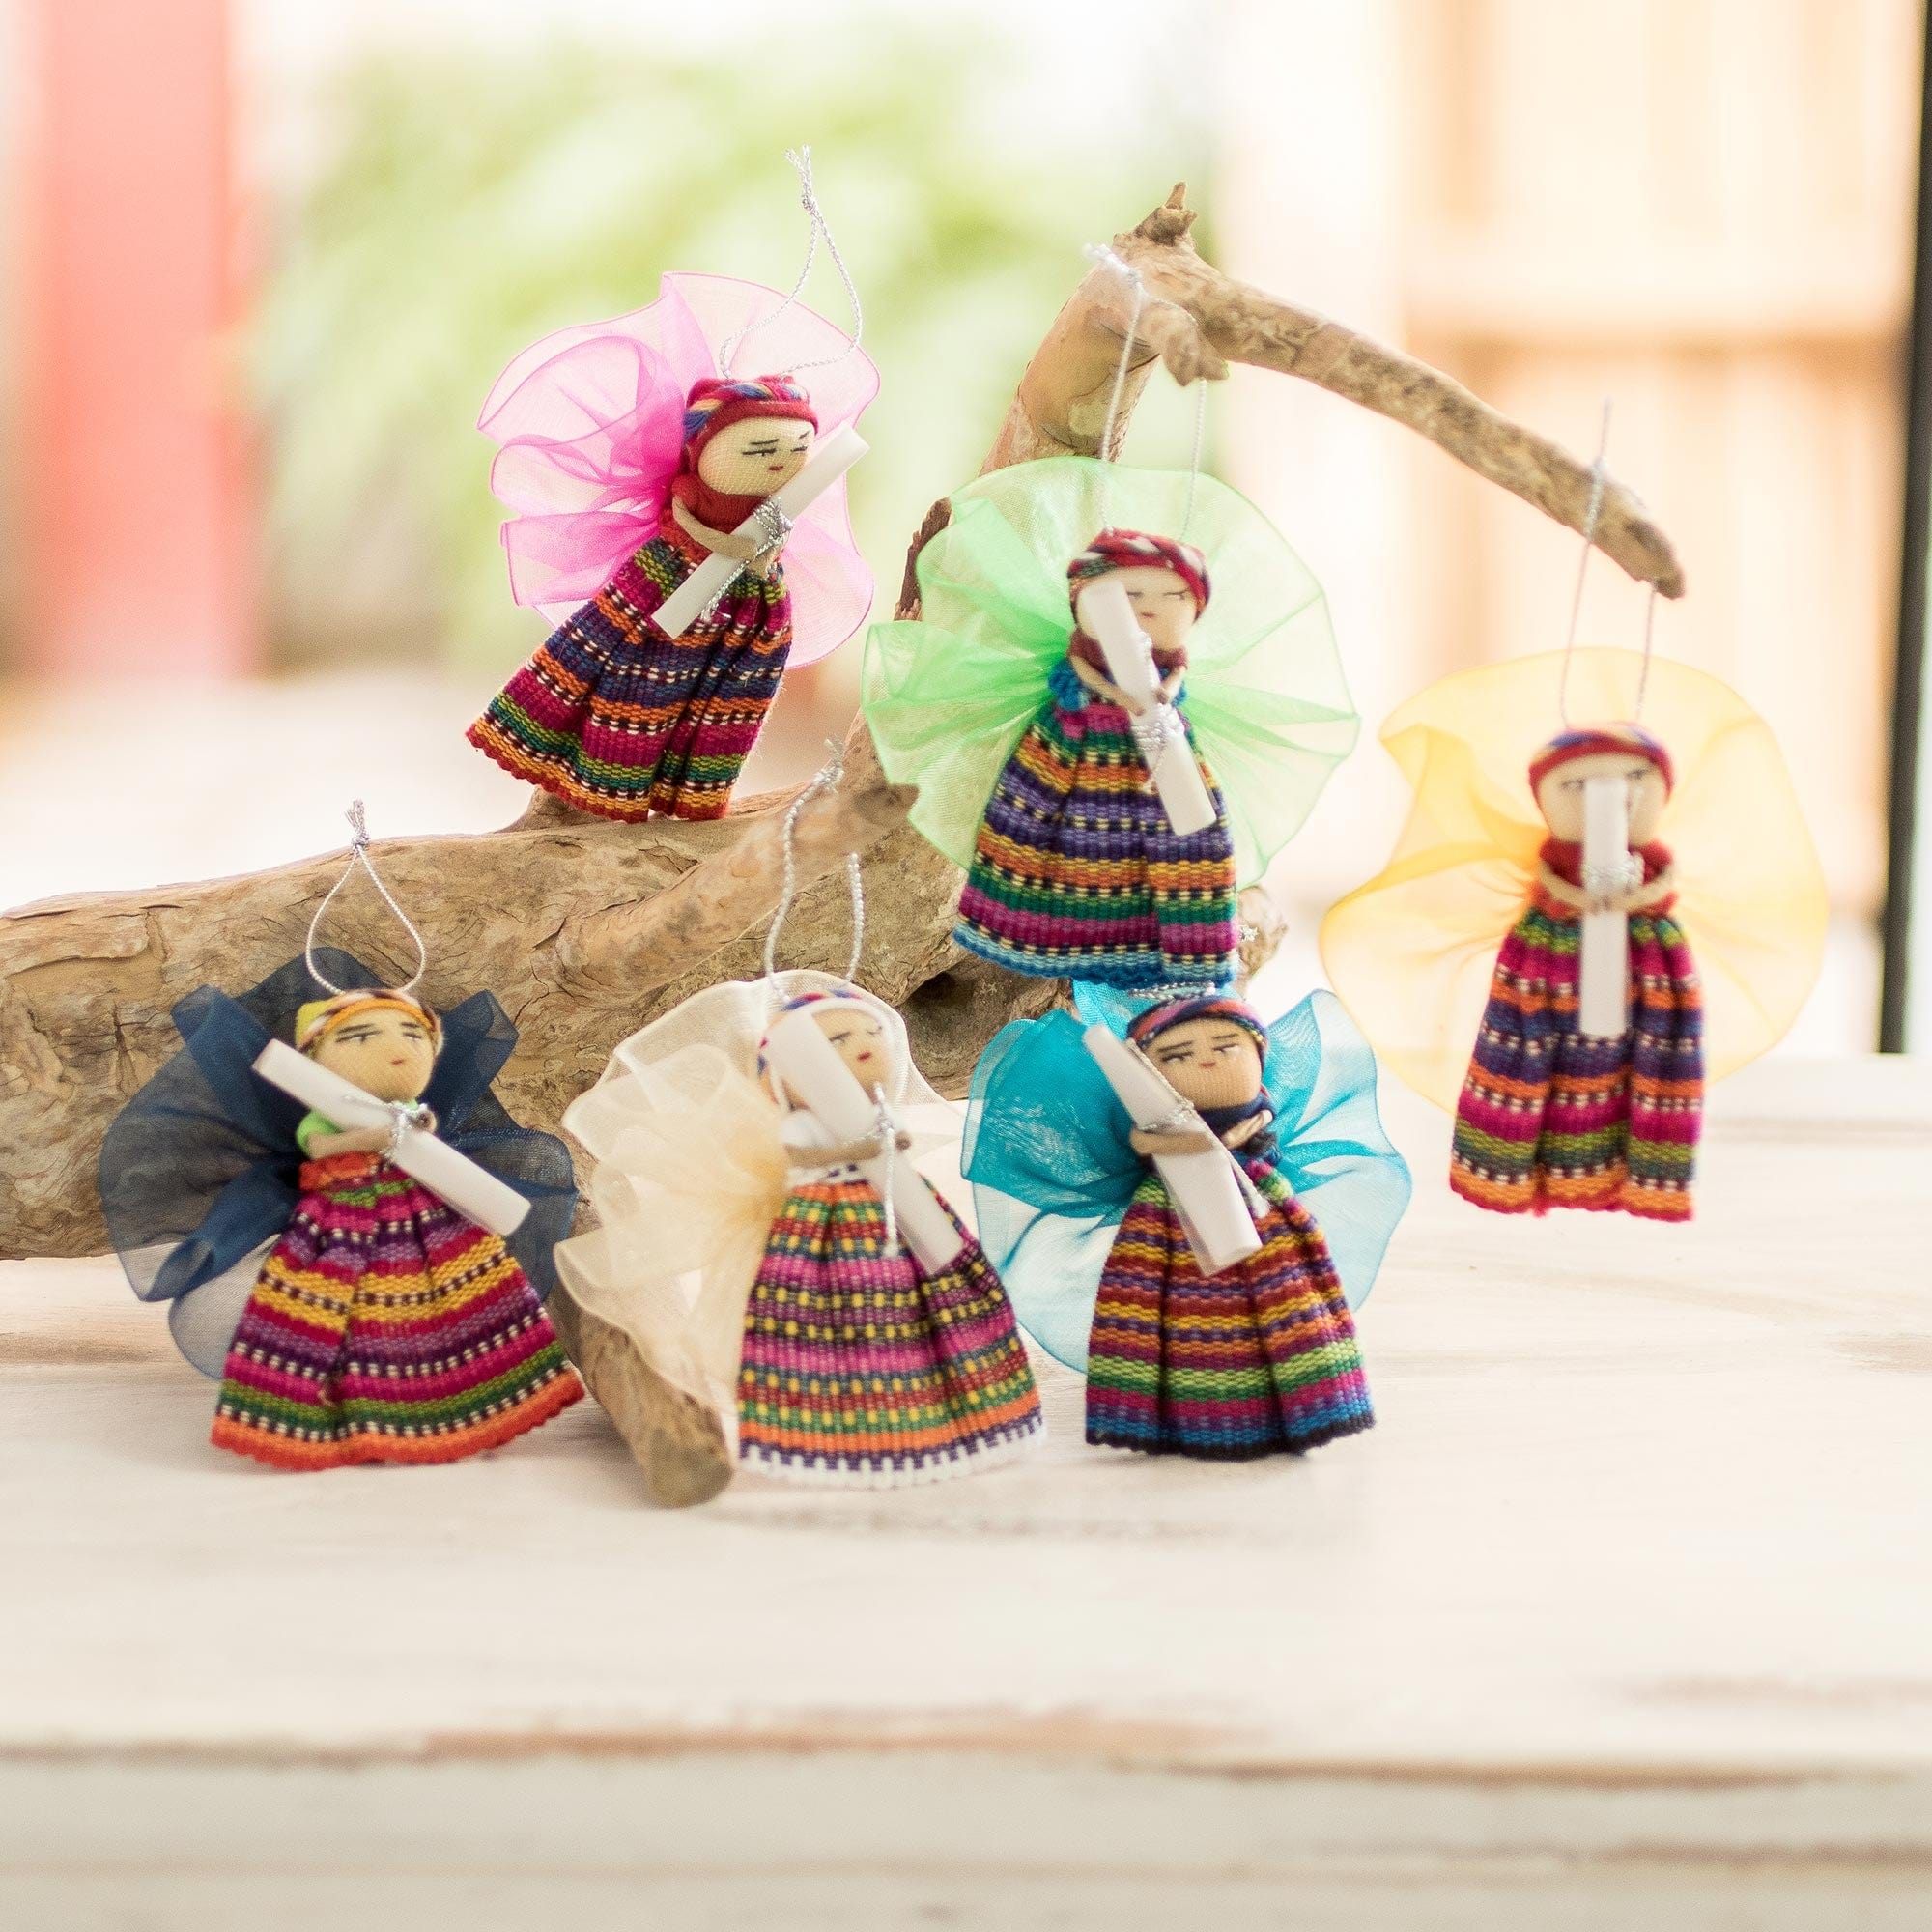 Handcrafted Worry Doll Christmas Ornament - Kahlo – GlobeIn